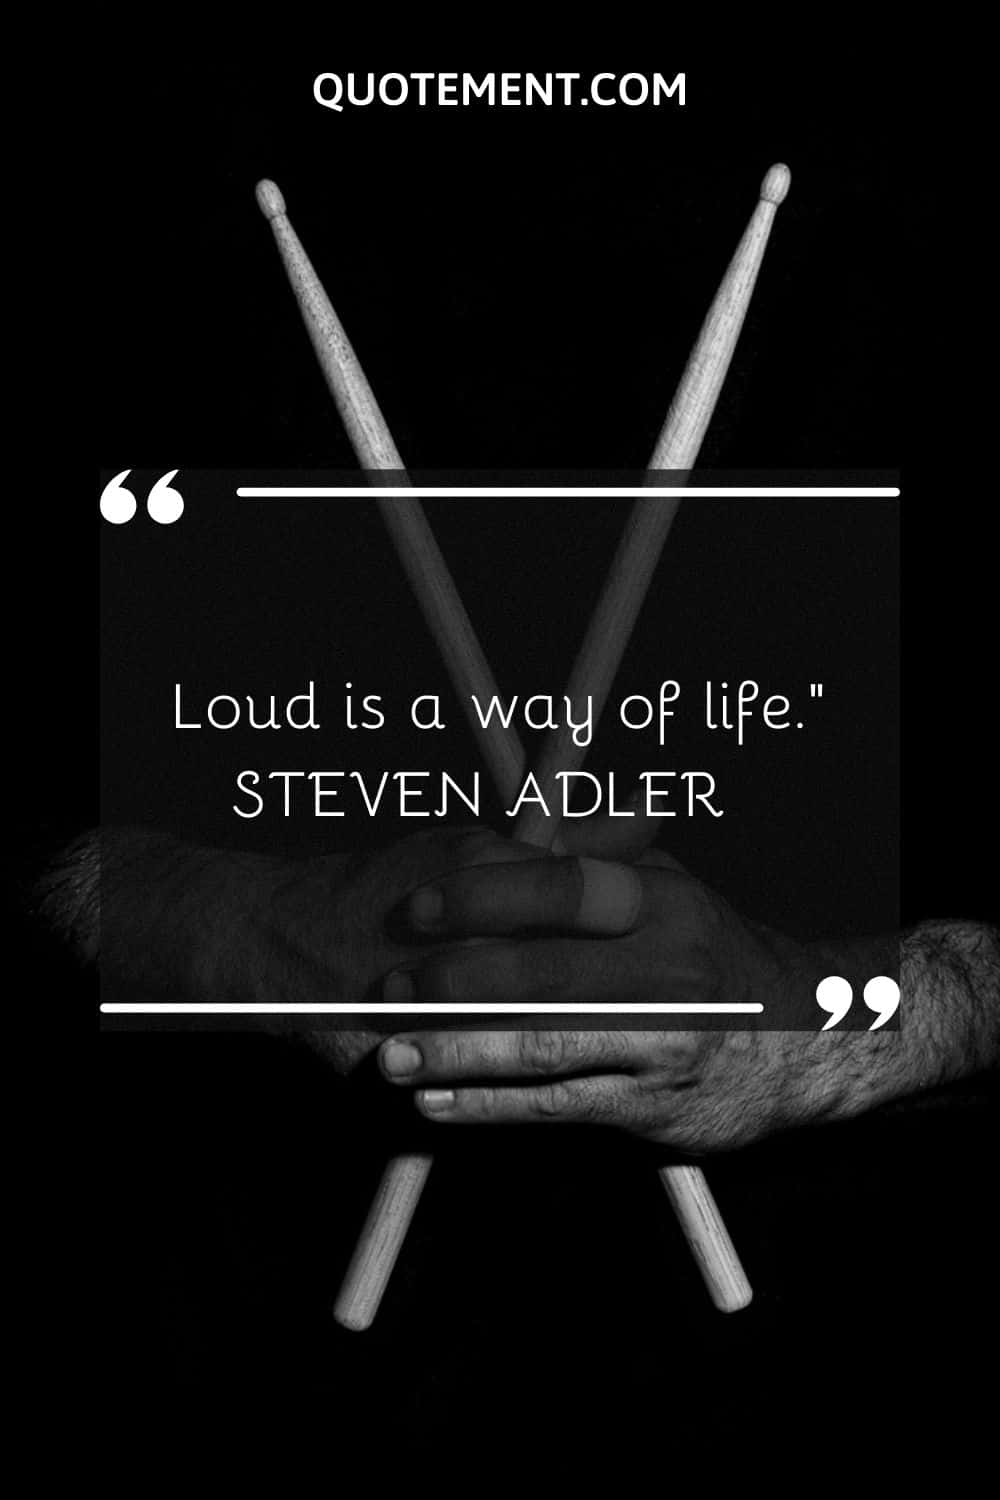 Loud is a way of life